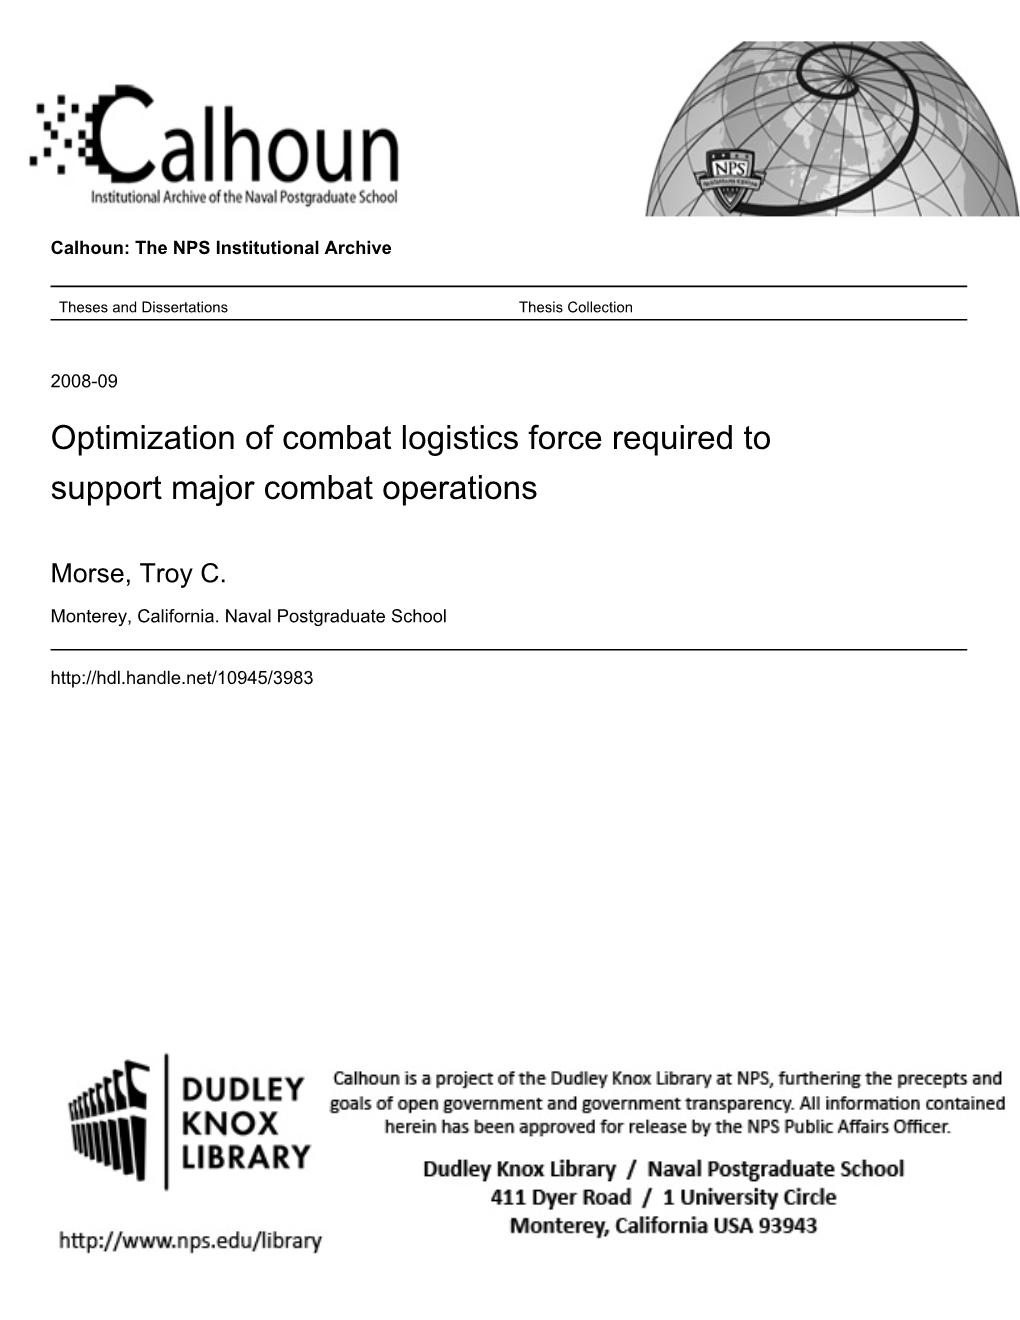 Optimization of Combat Logistics Force Required to Support Major Combat Operations